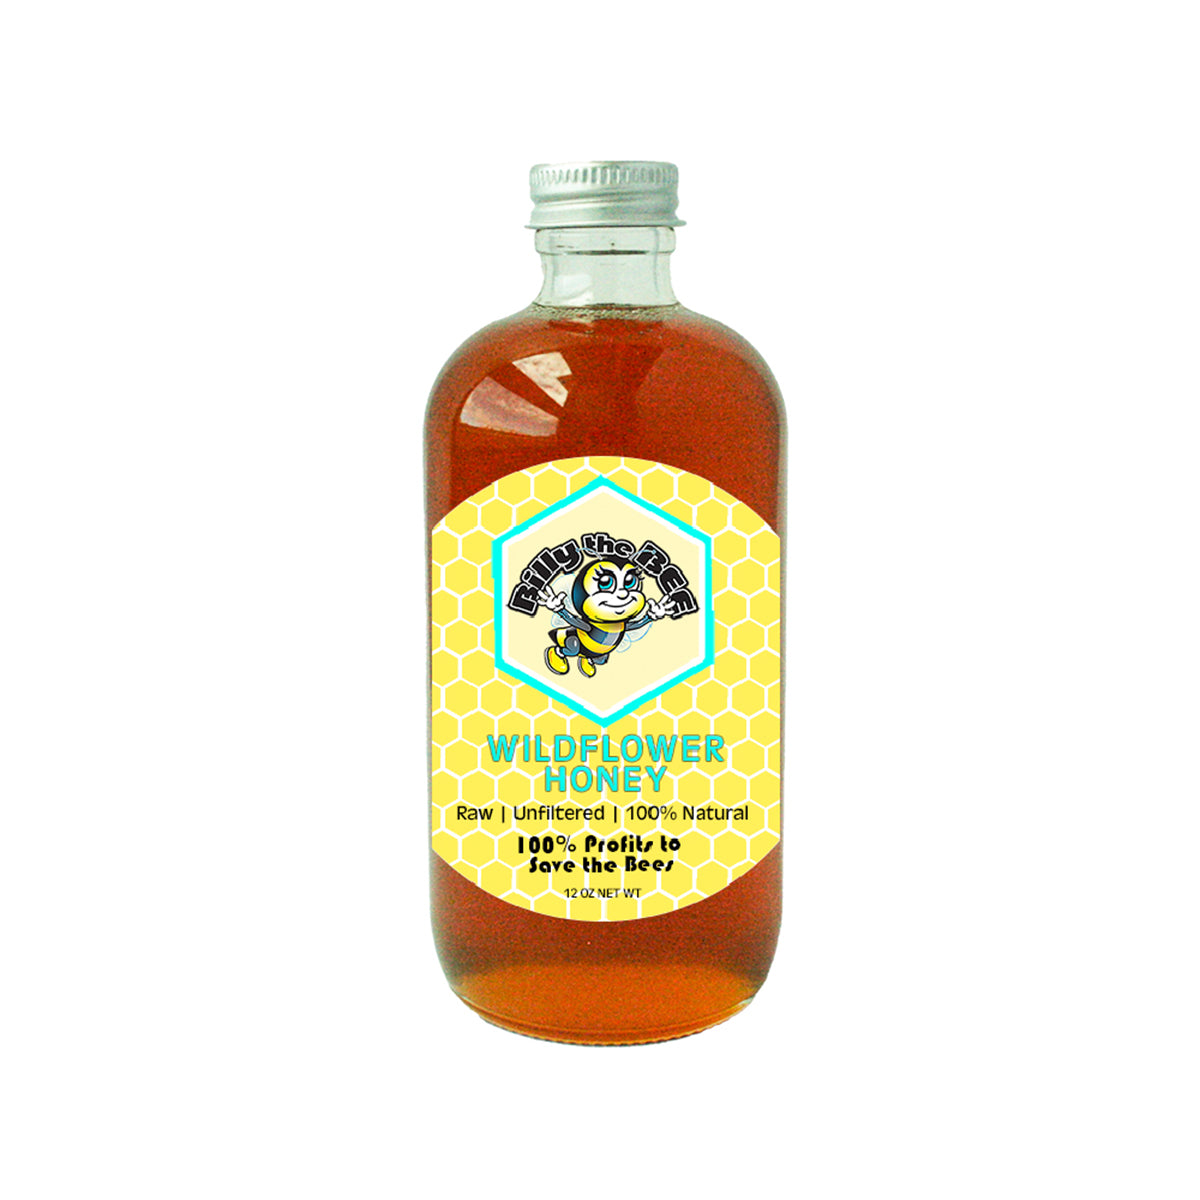 Wildflower Honey from Billy the Bee brand